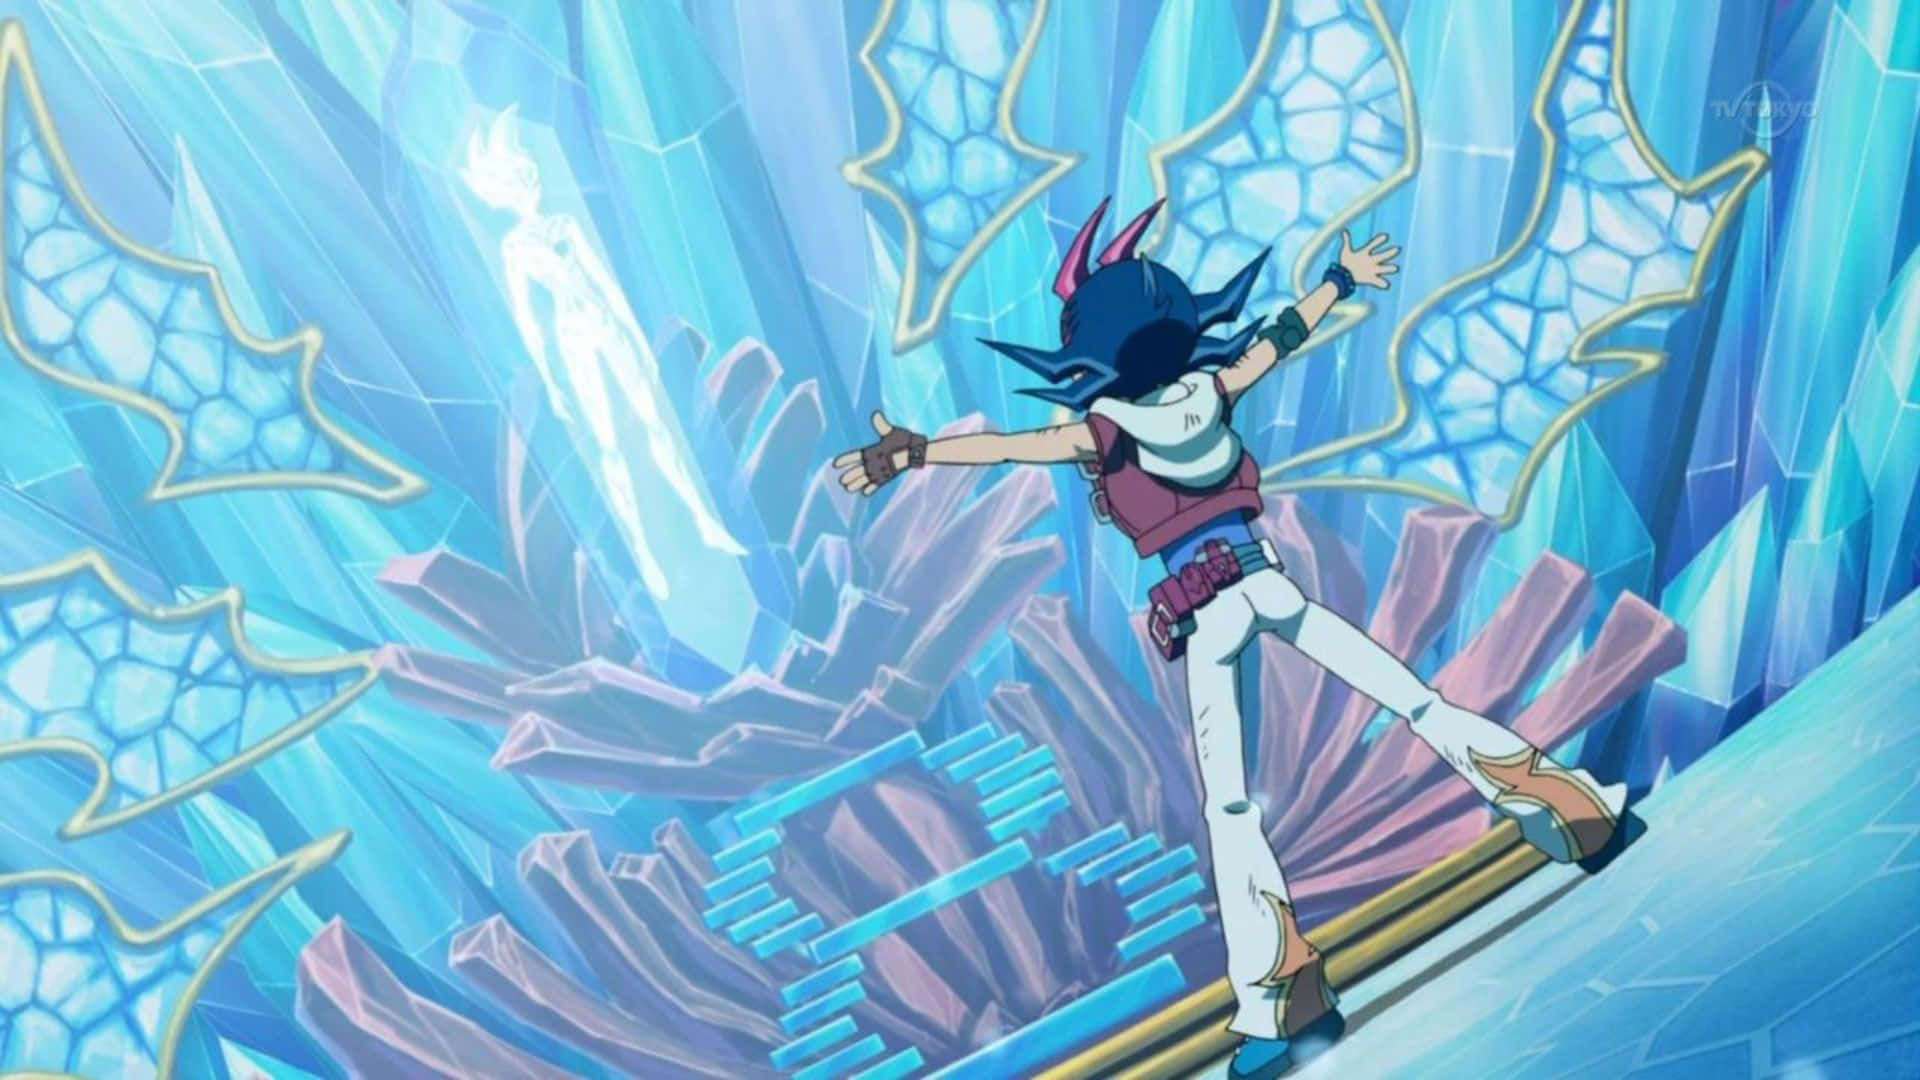 Yu-Gi-Oh Astral character in action on a 1920x1080 wallpaper Wallpaper